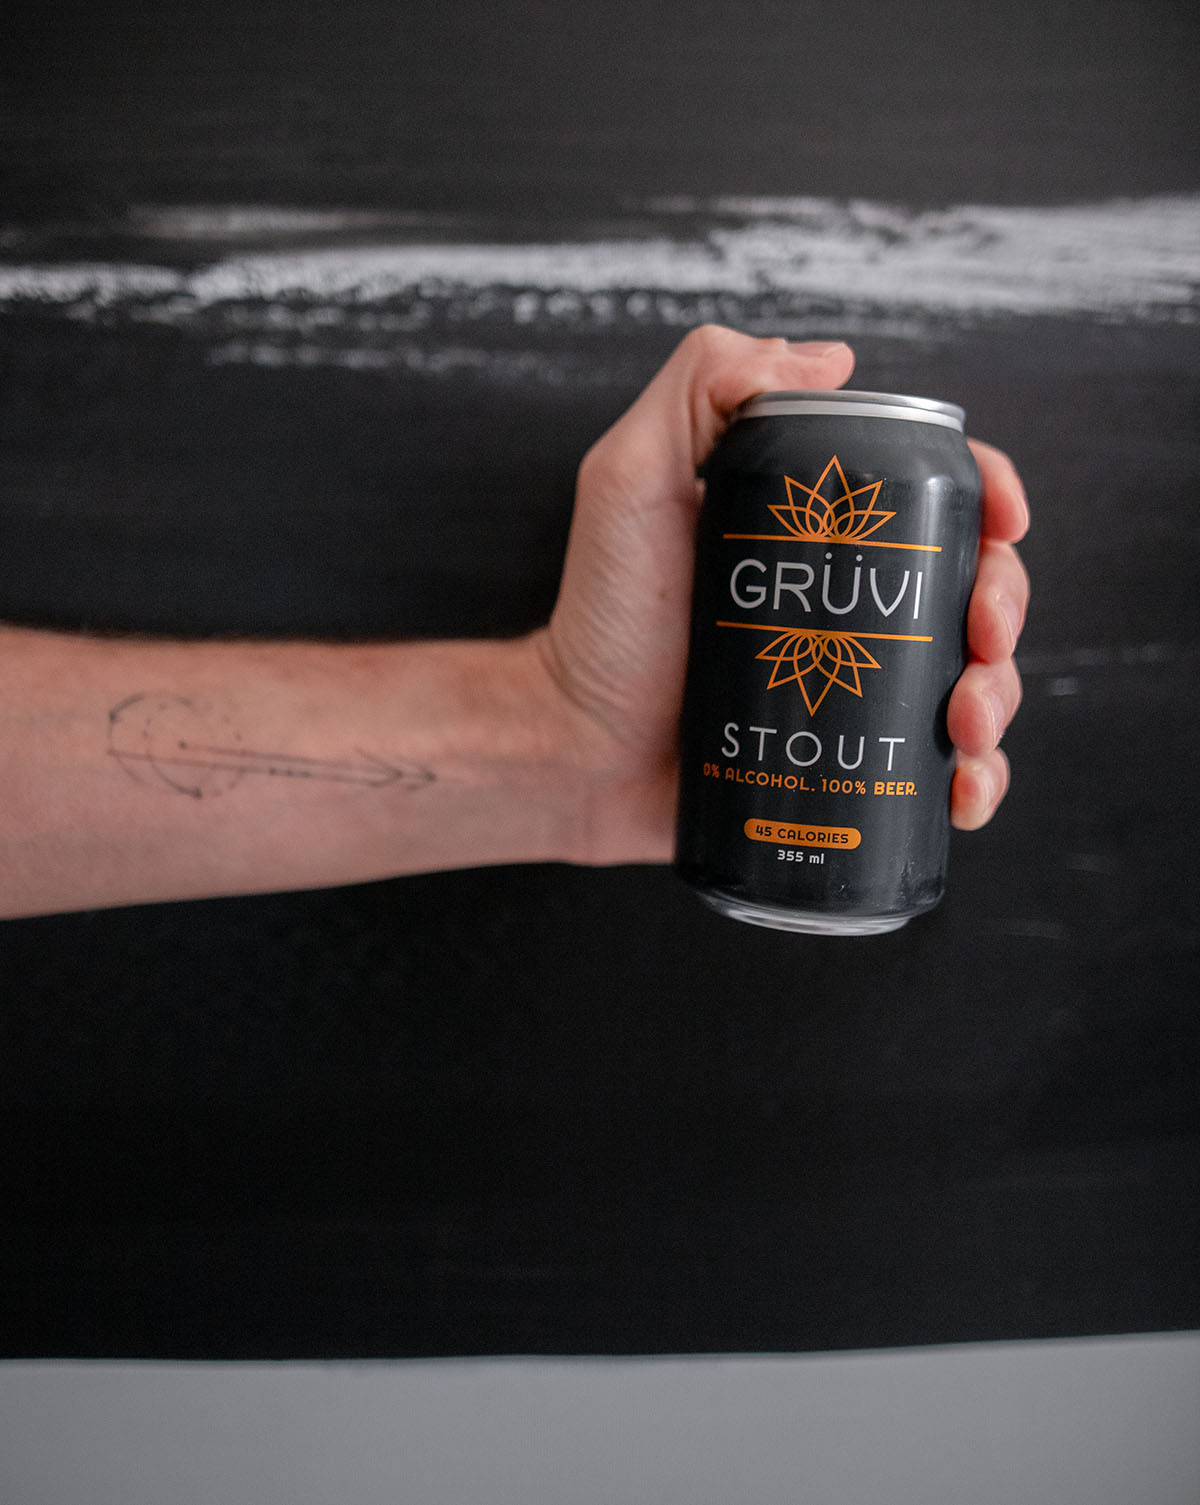 gruvi review